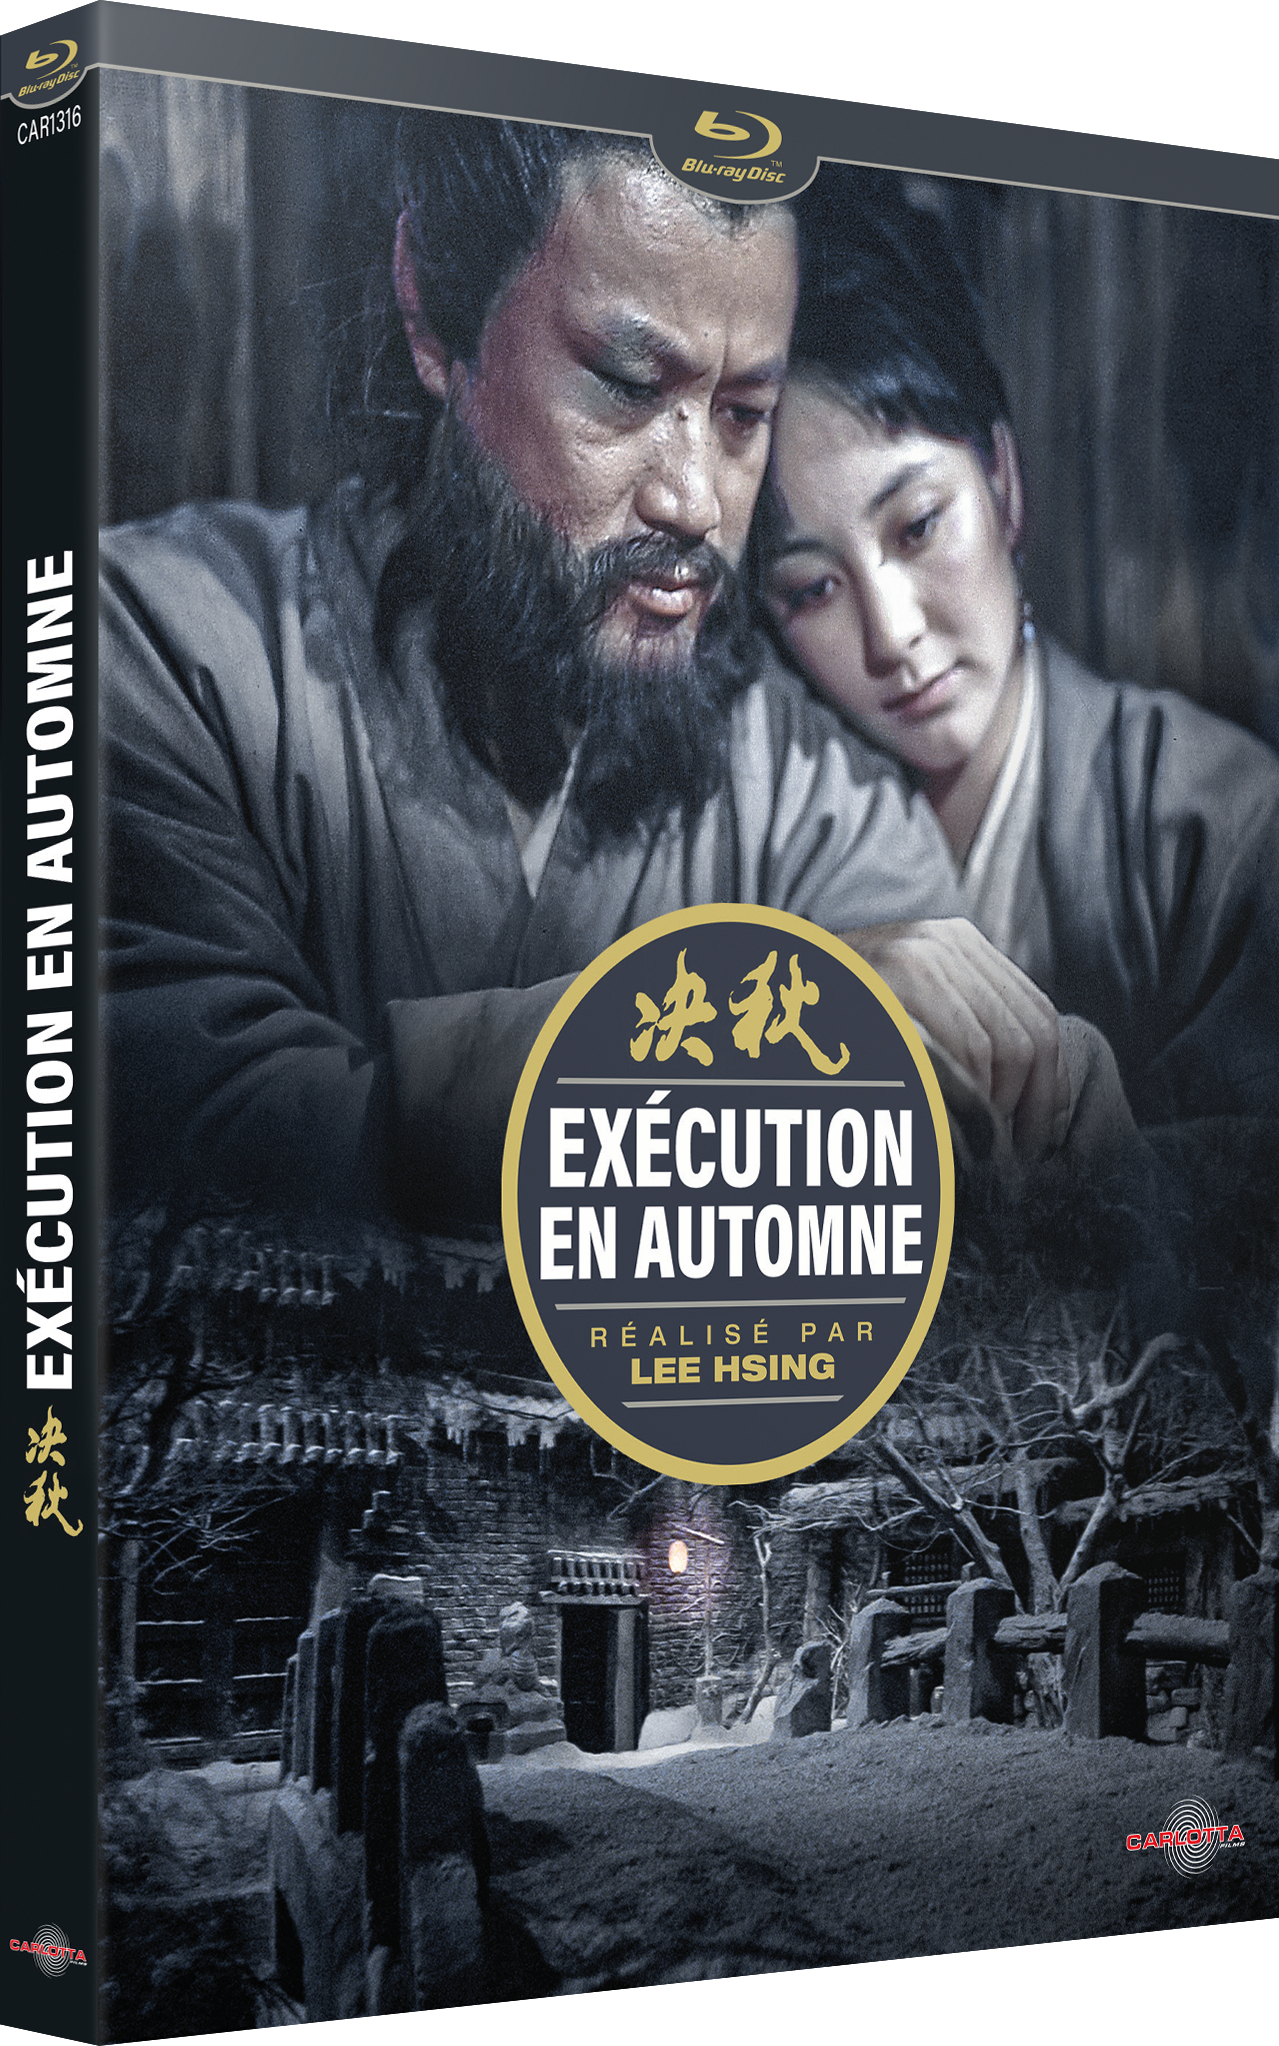 Lee Hsing's Autumn Execution